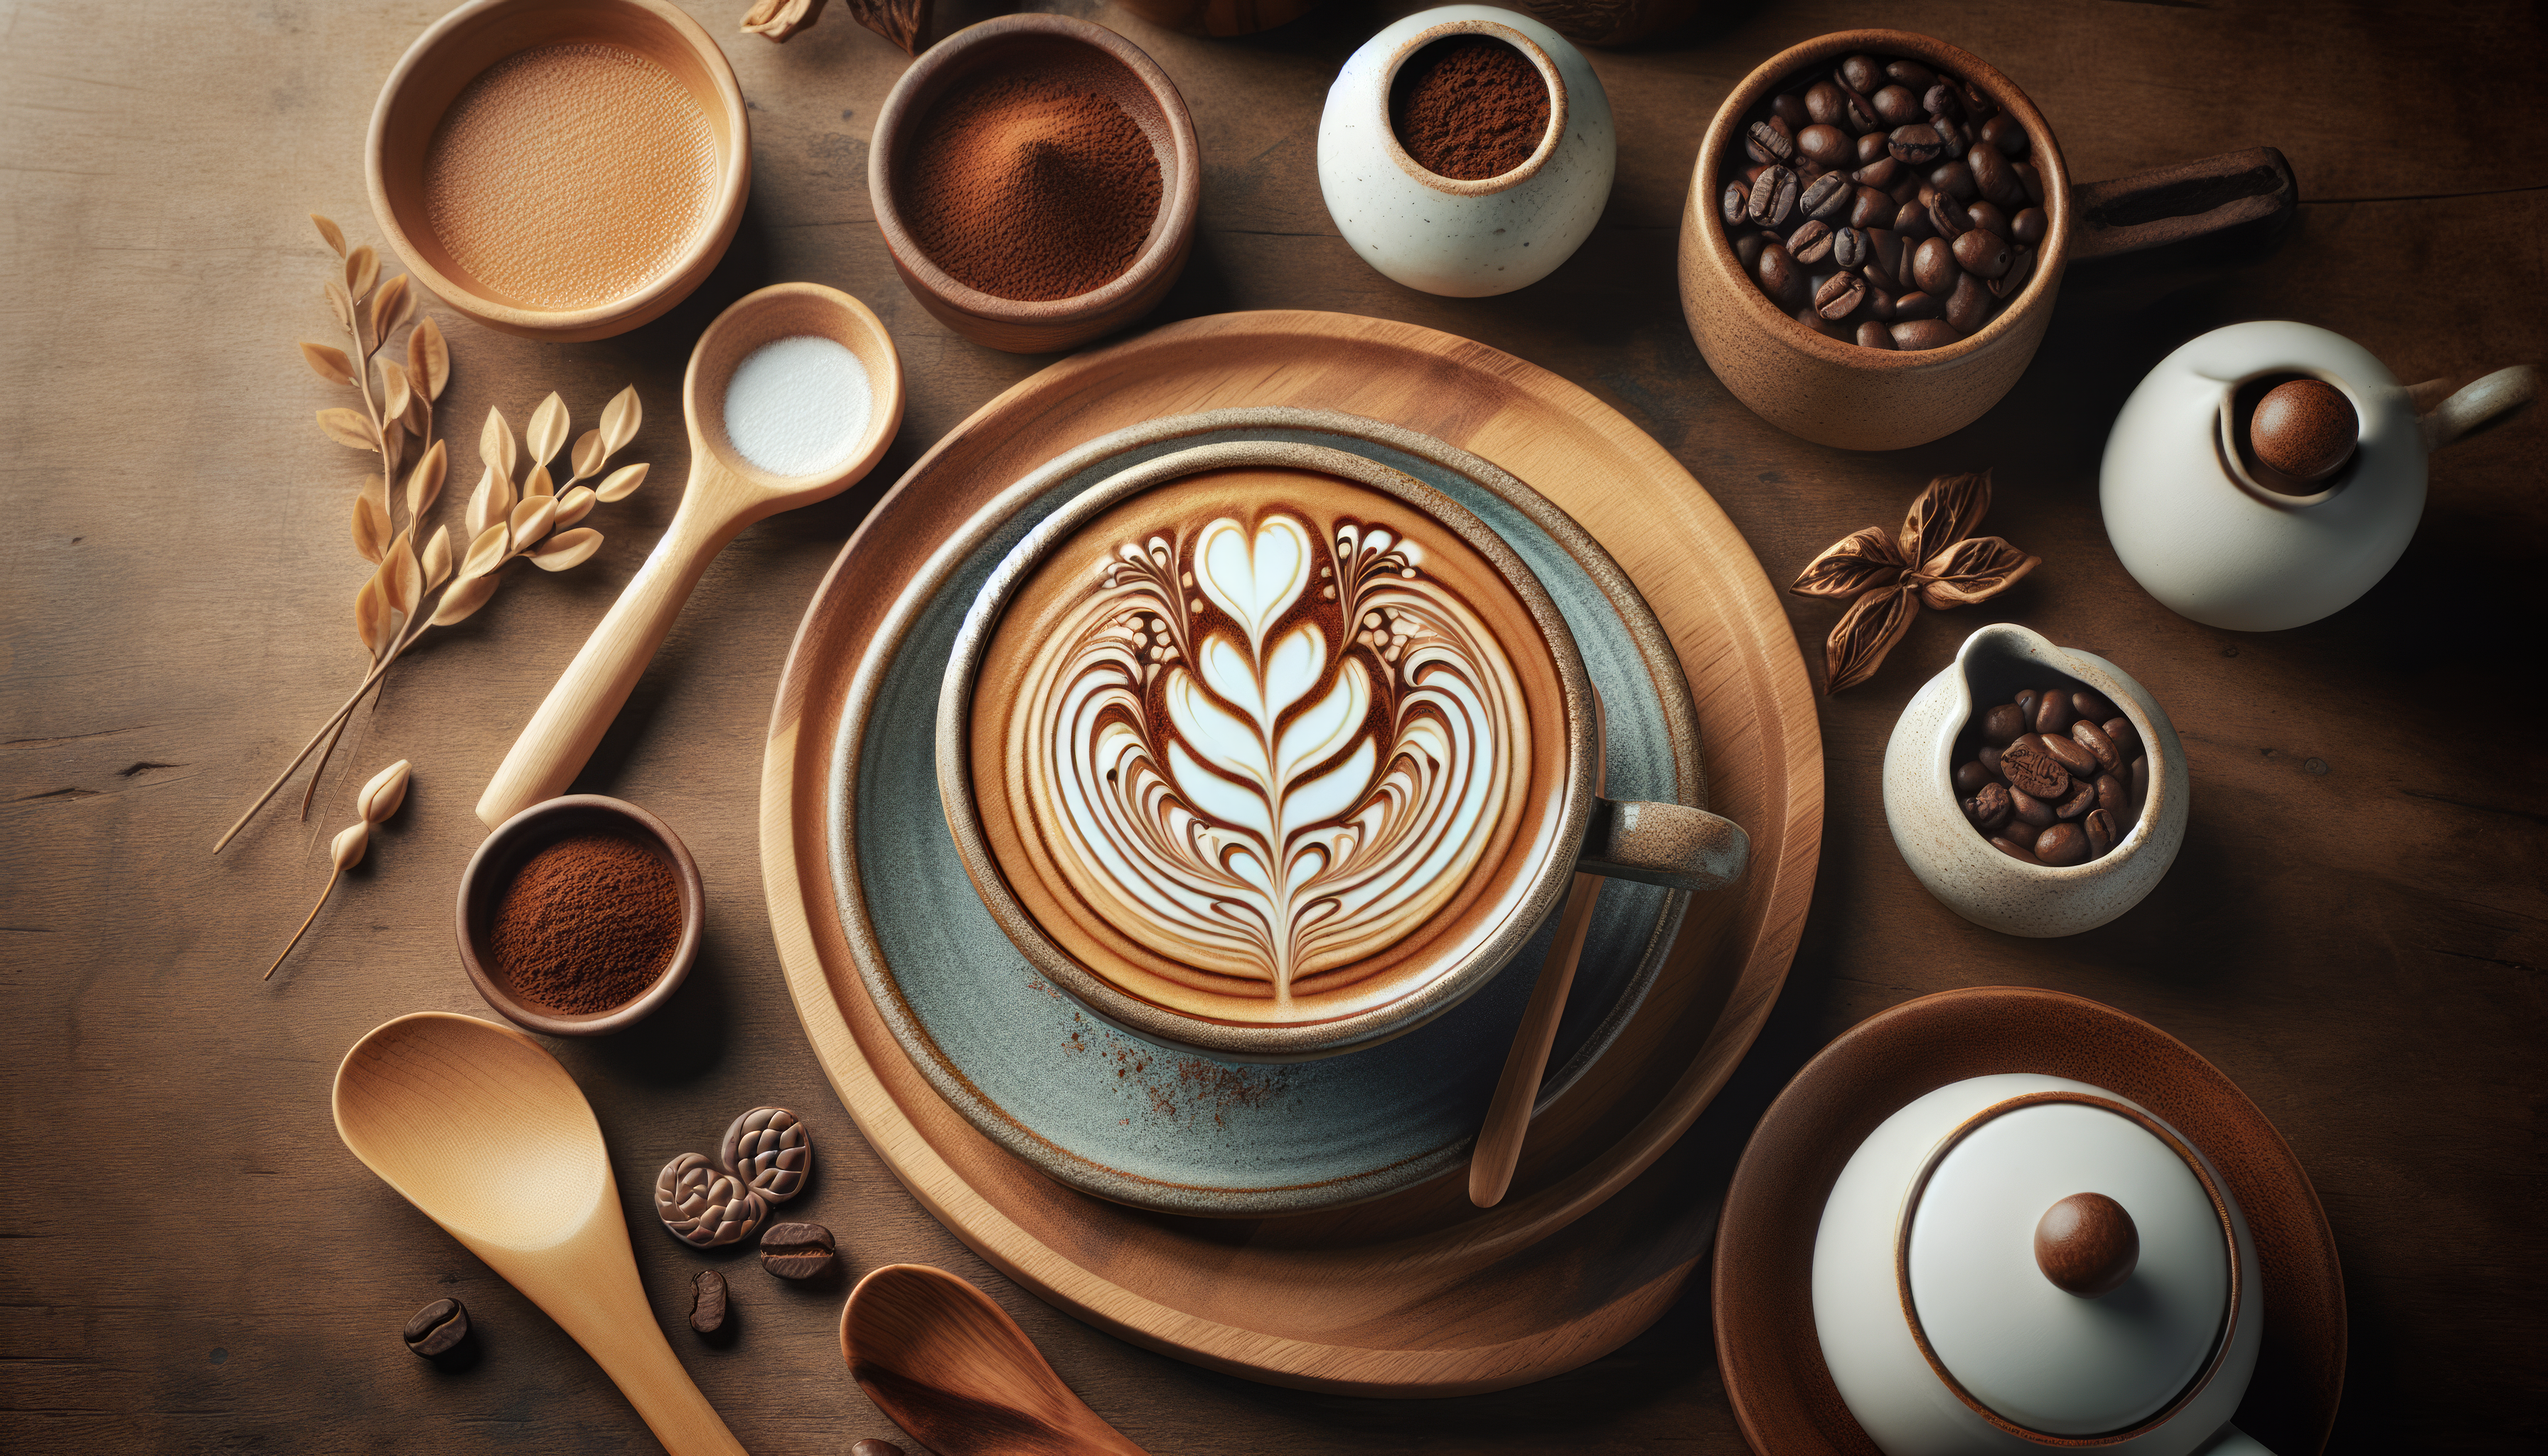 The Heart of Crafted Coffees